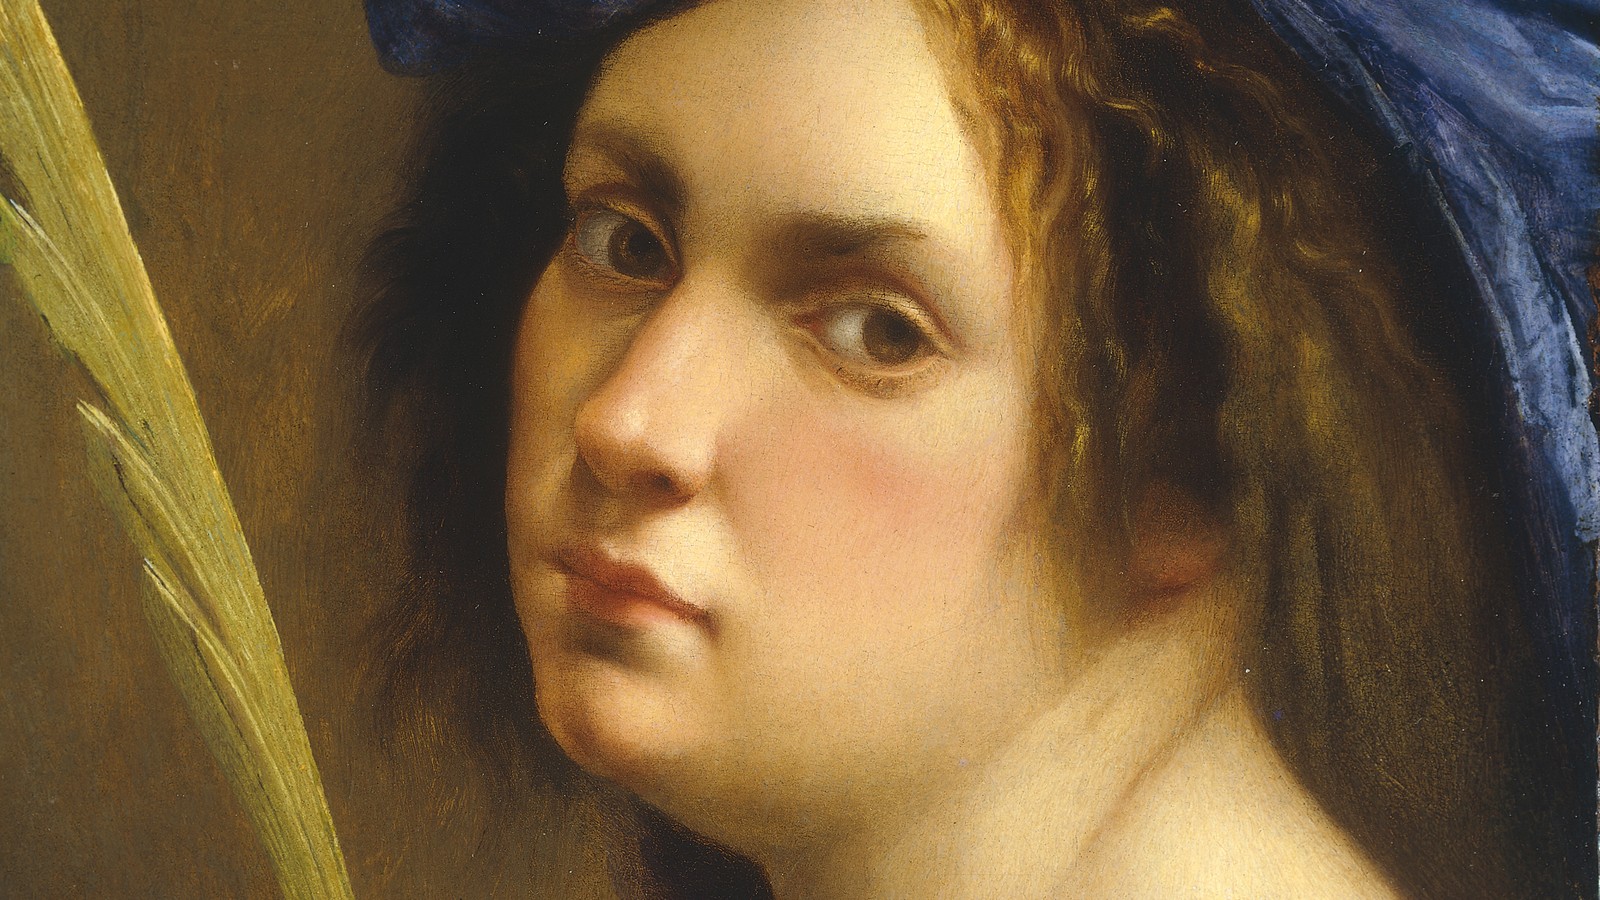 Solo Teen Close Up Hd - The Feminist Rediscovery of Artemisia Gentileschi - The Atlantic